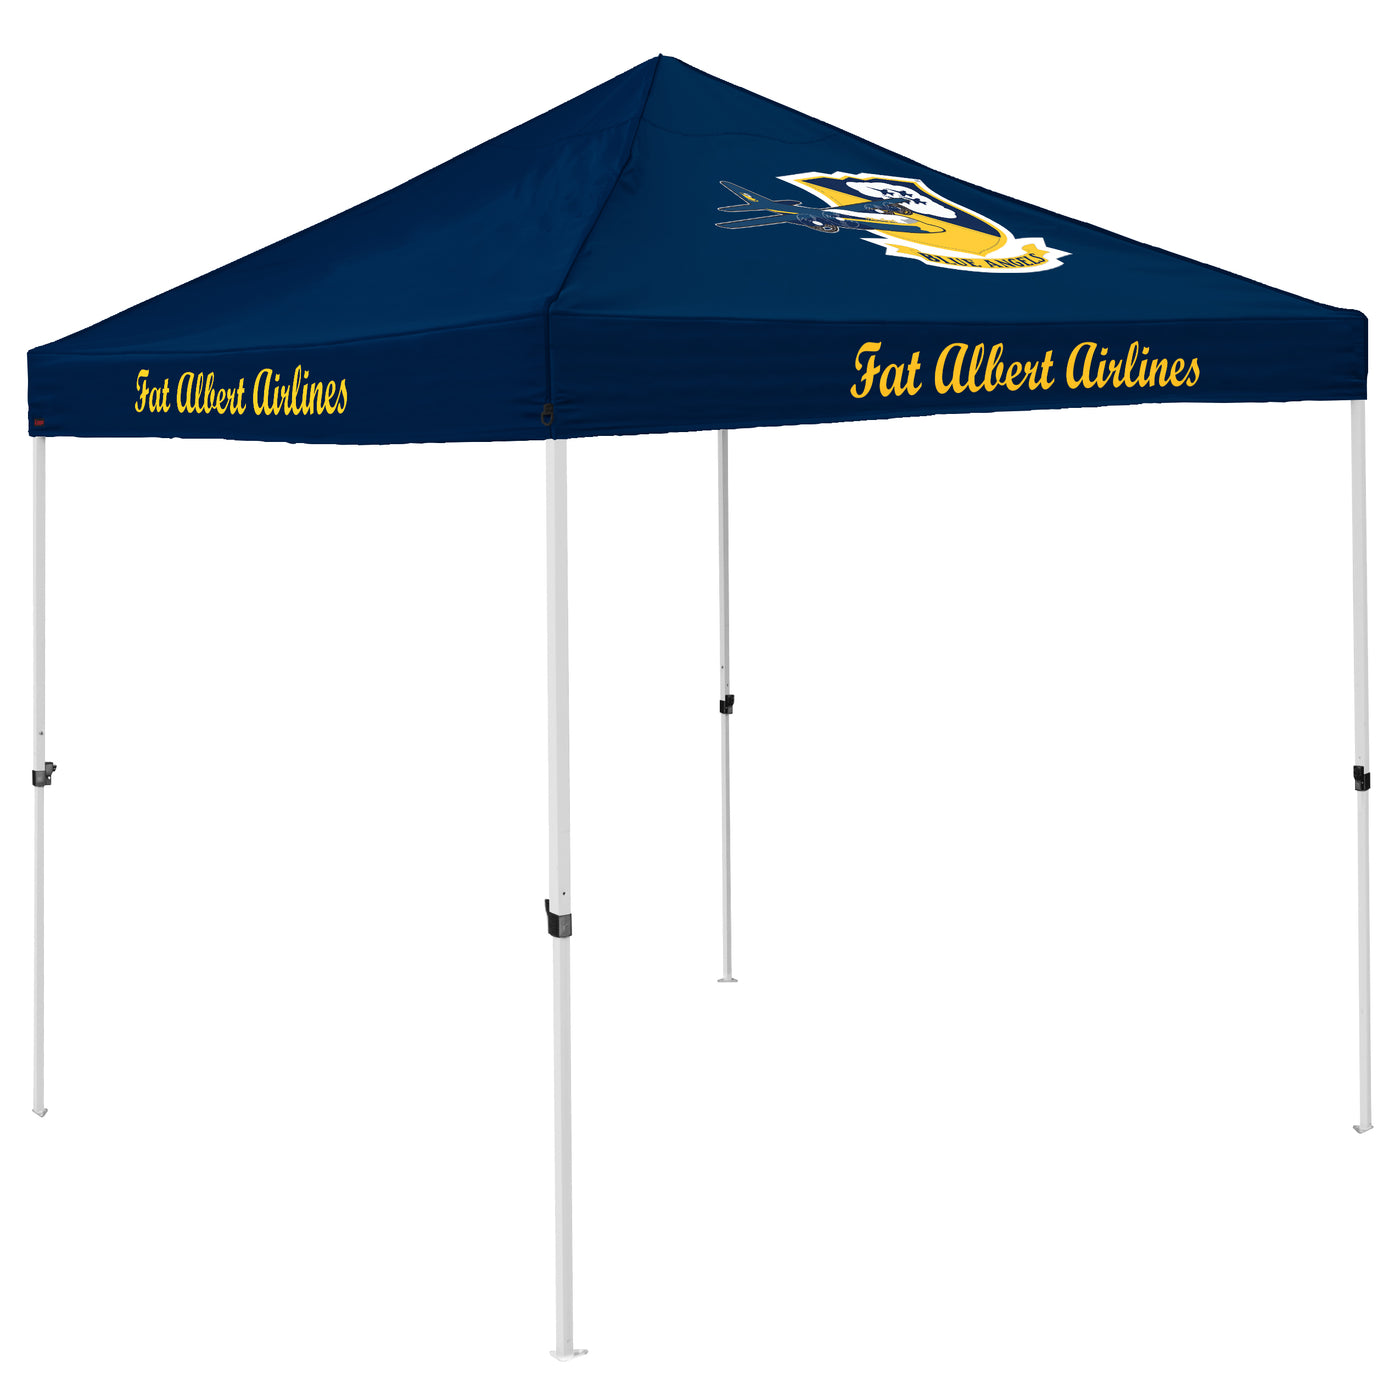 Fat Albert Airlines Economy Canopy